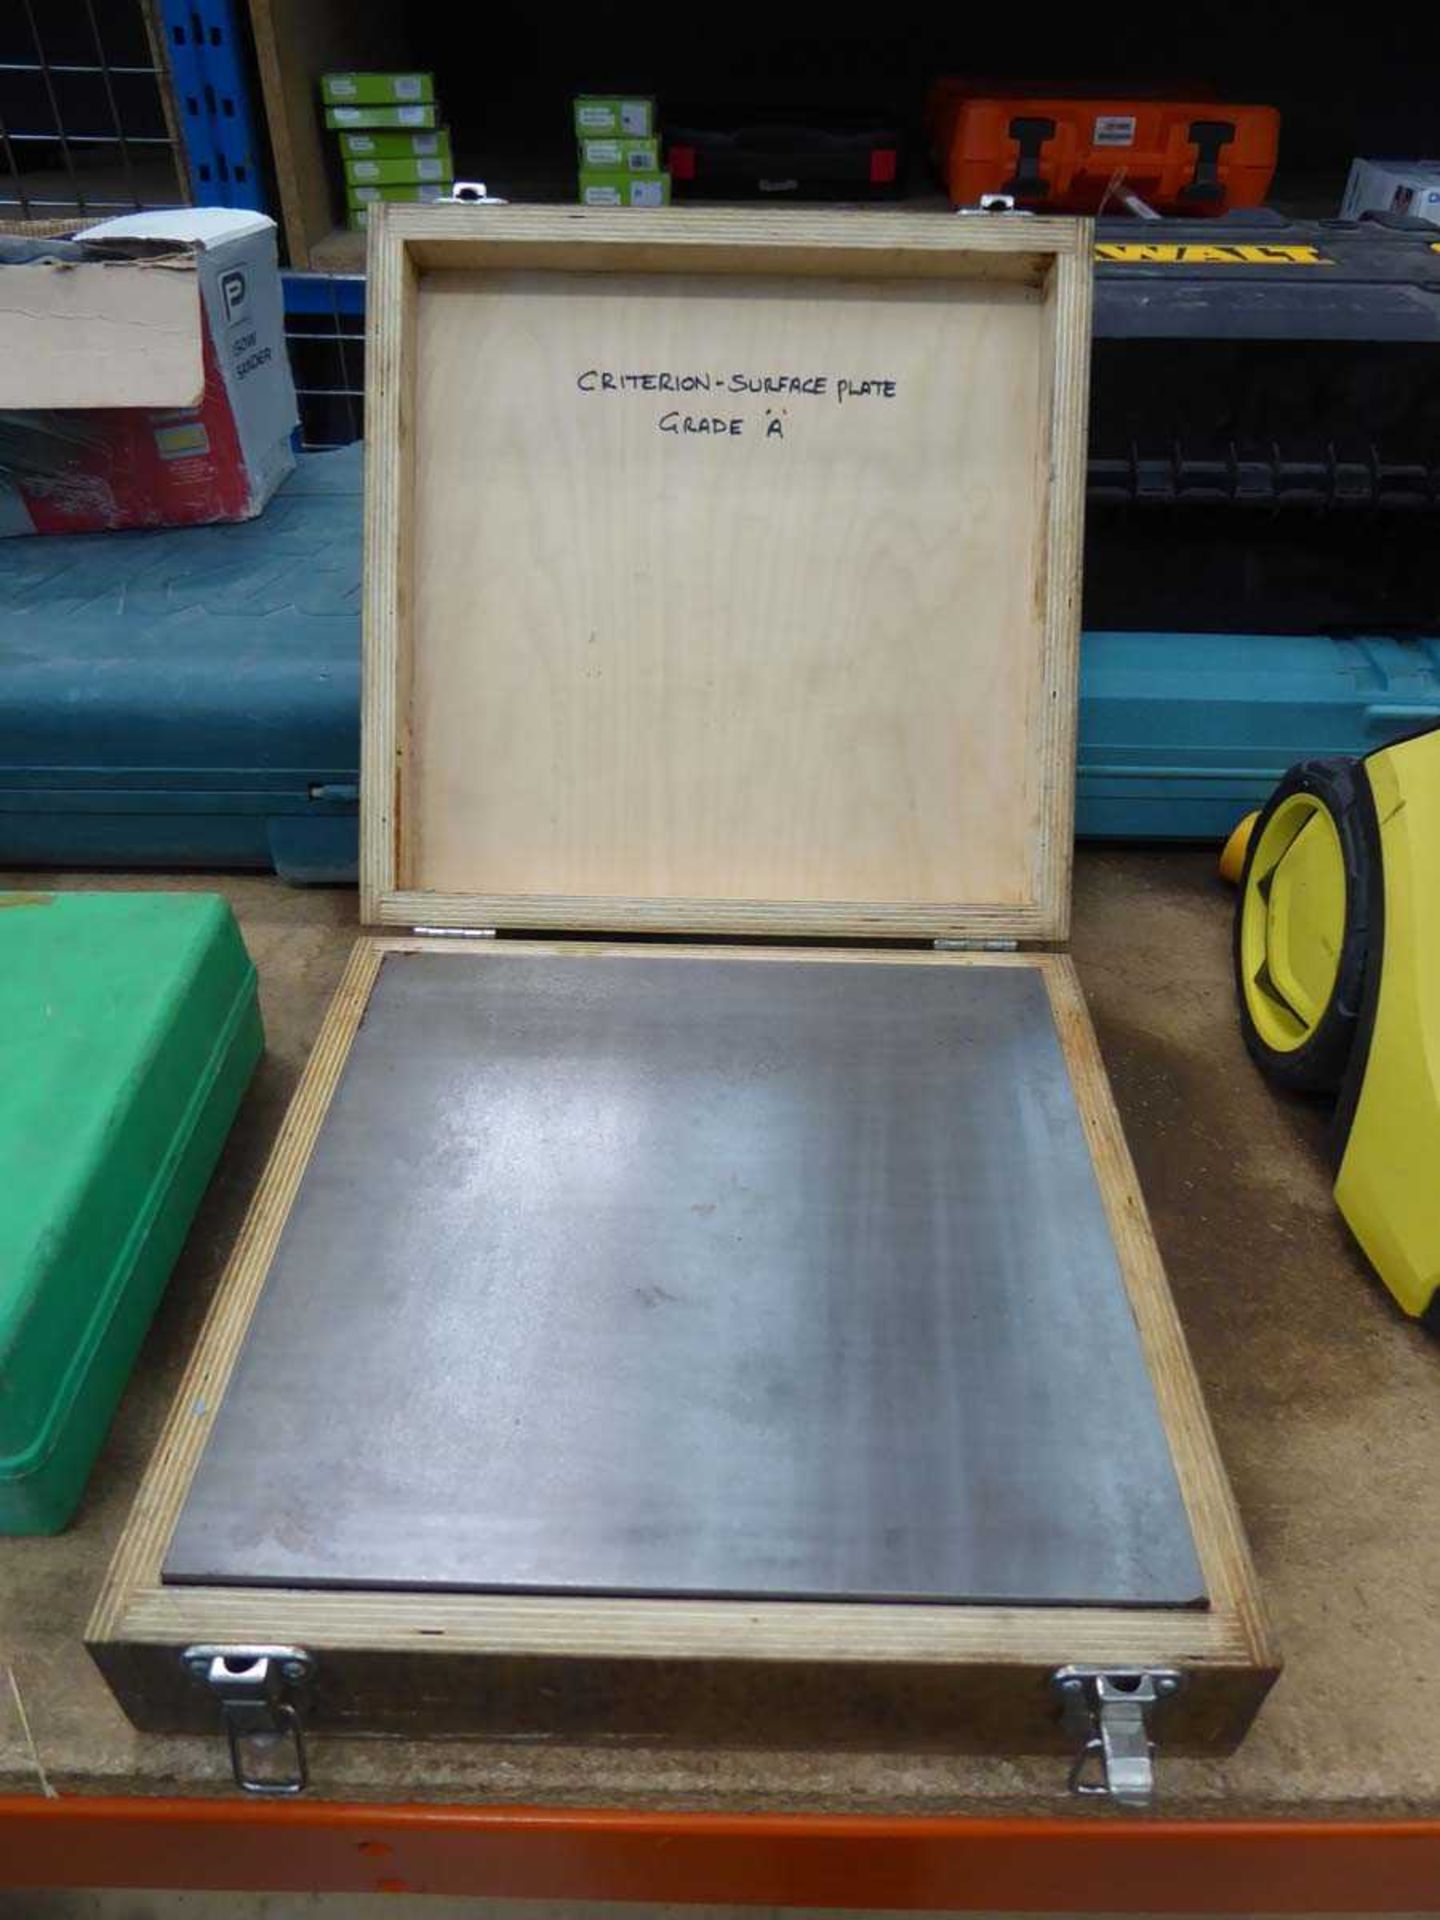 Engineers surface plate in case